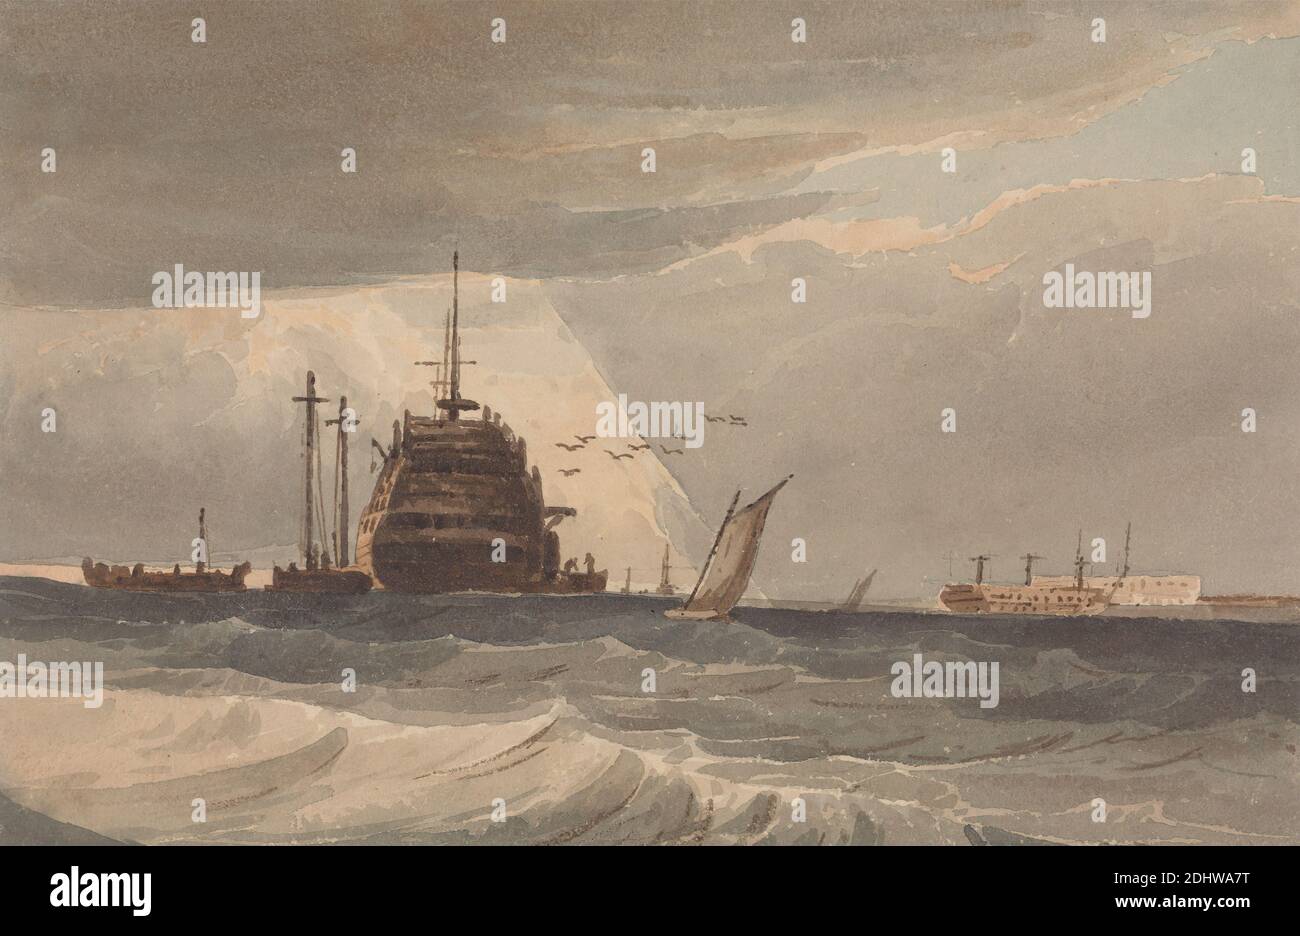 Off Portsmouth: Boats Loading or Unloading a Large Hulk, Small Craft Nearby, Follower of Samuel Prout, 1783–1852, British, undated, Watercolor over graphite on thick, slightly textured, cream wove paper, Sheet: 6 5/8 x 10 3/16 inches (16.9 x 25.9 cm), boats, clouds, coast, hulk (watercraft by form), marine art, port, sailboats, sea, ships, waves (natural events), England, Europe, Hampshire, Portsmouth, United Kingdom Stock Photo